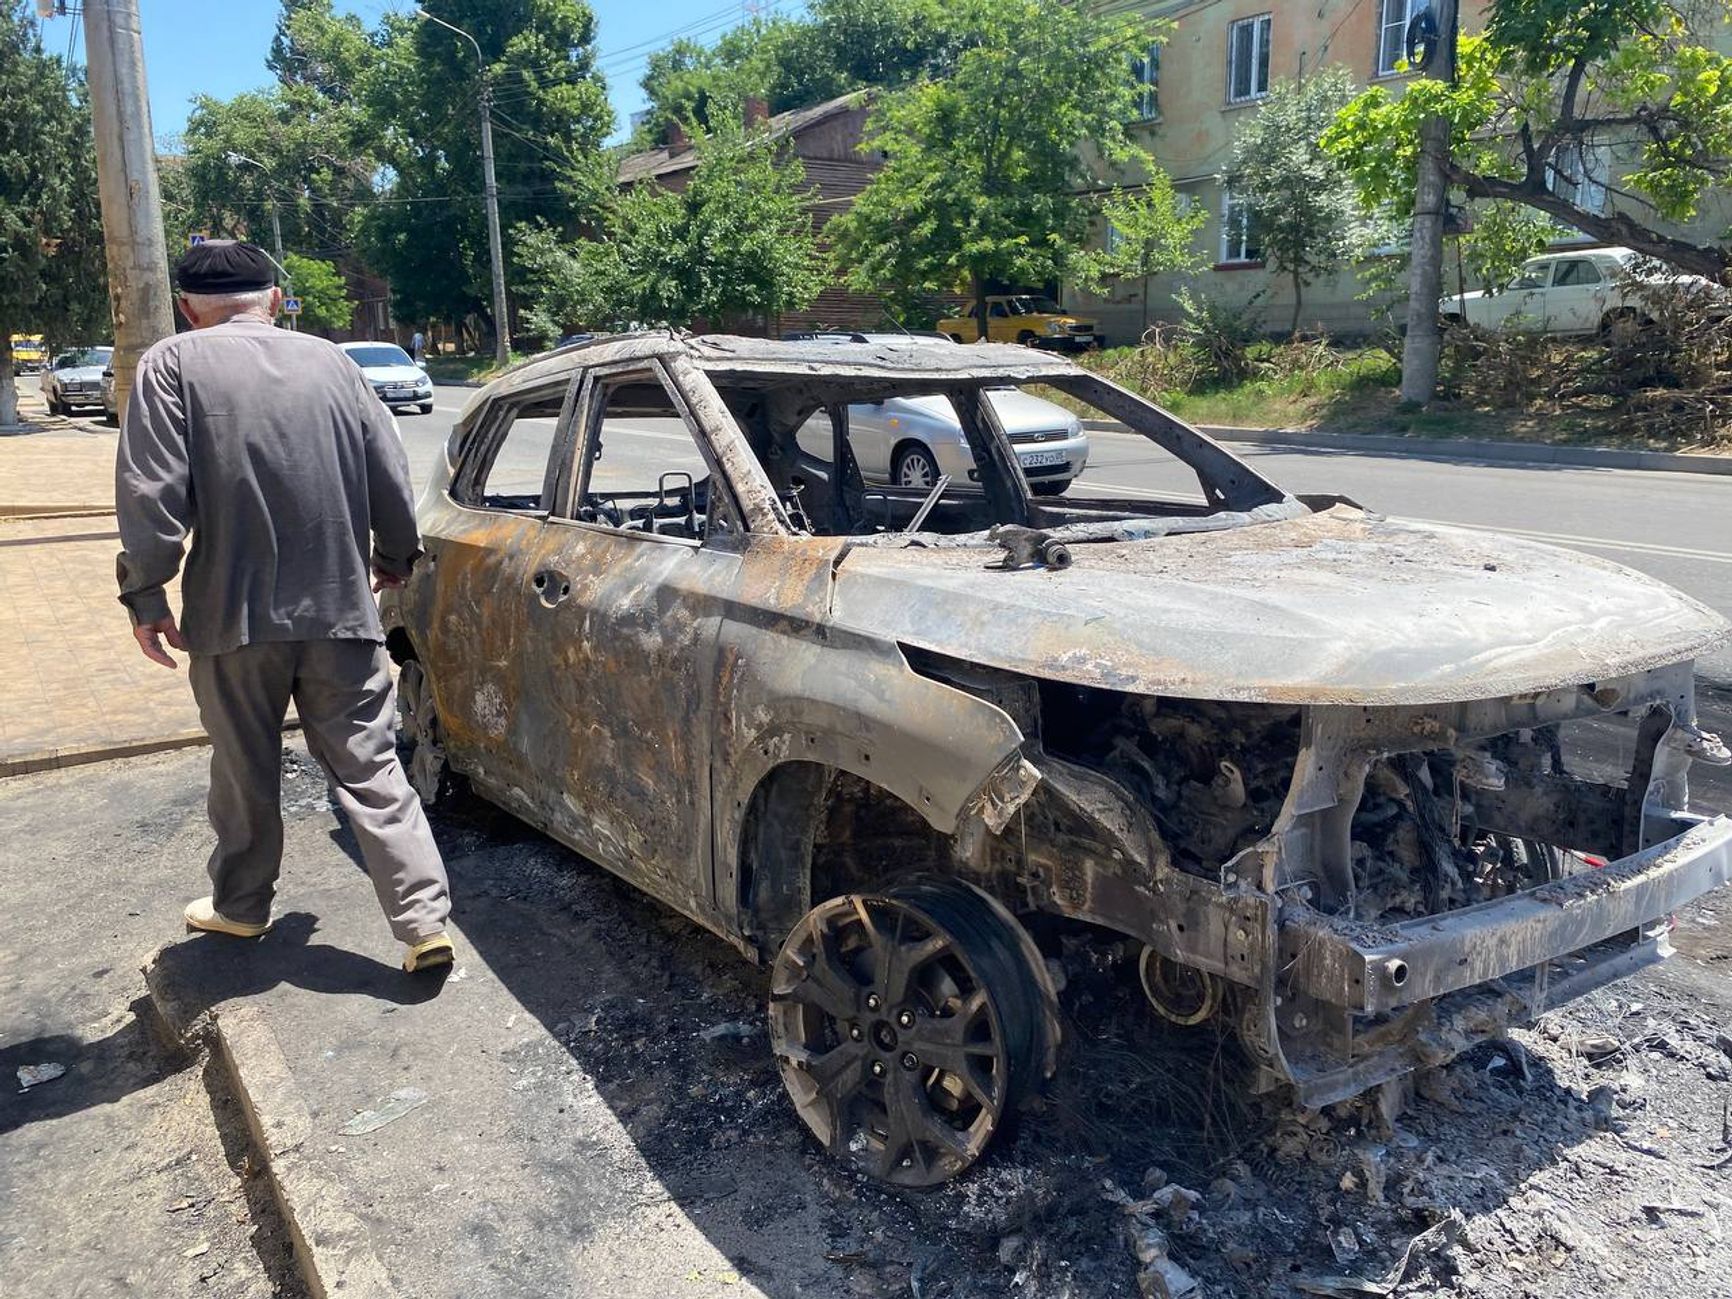 A burnt-out car on Mirzabekova Street, not far from the cathedral, where the shootout between the terrorists and the police occurred